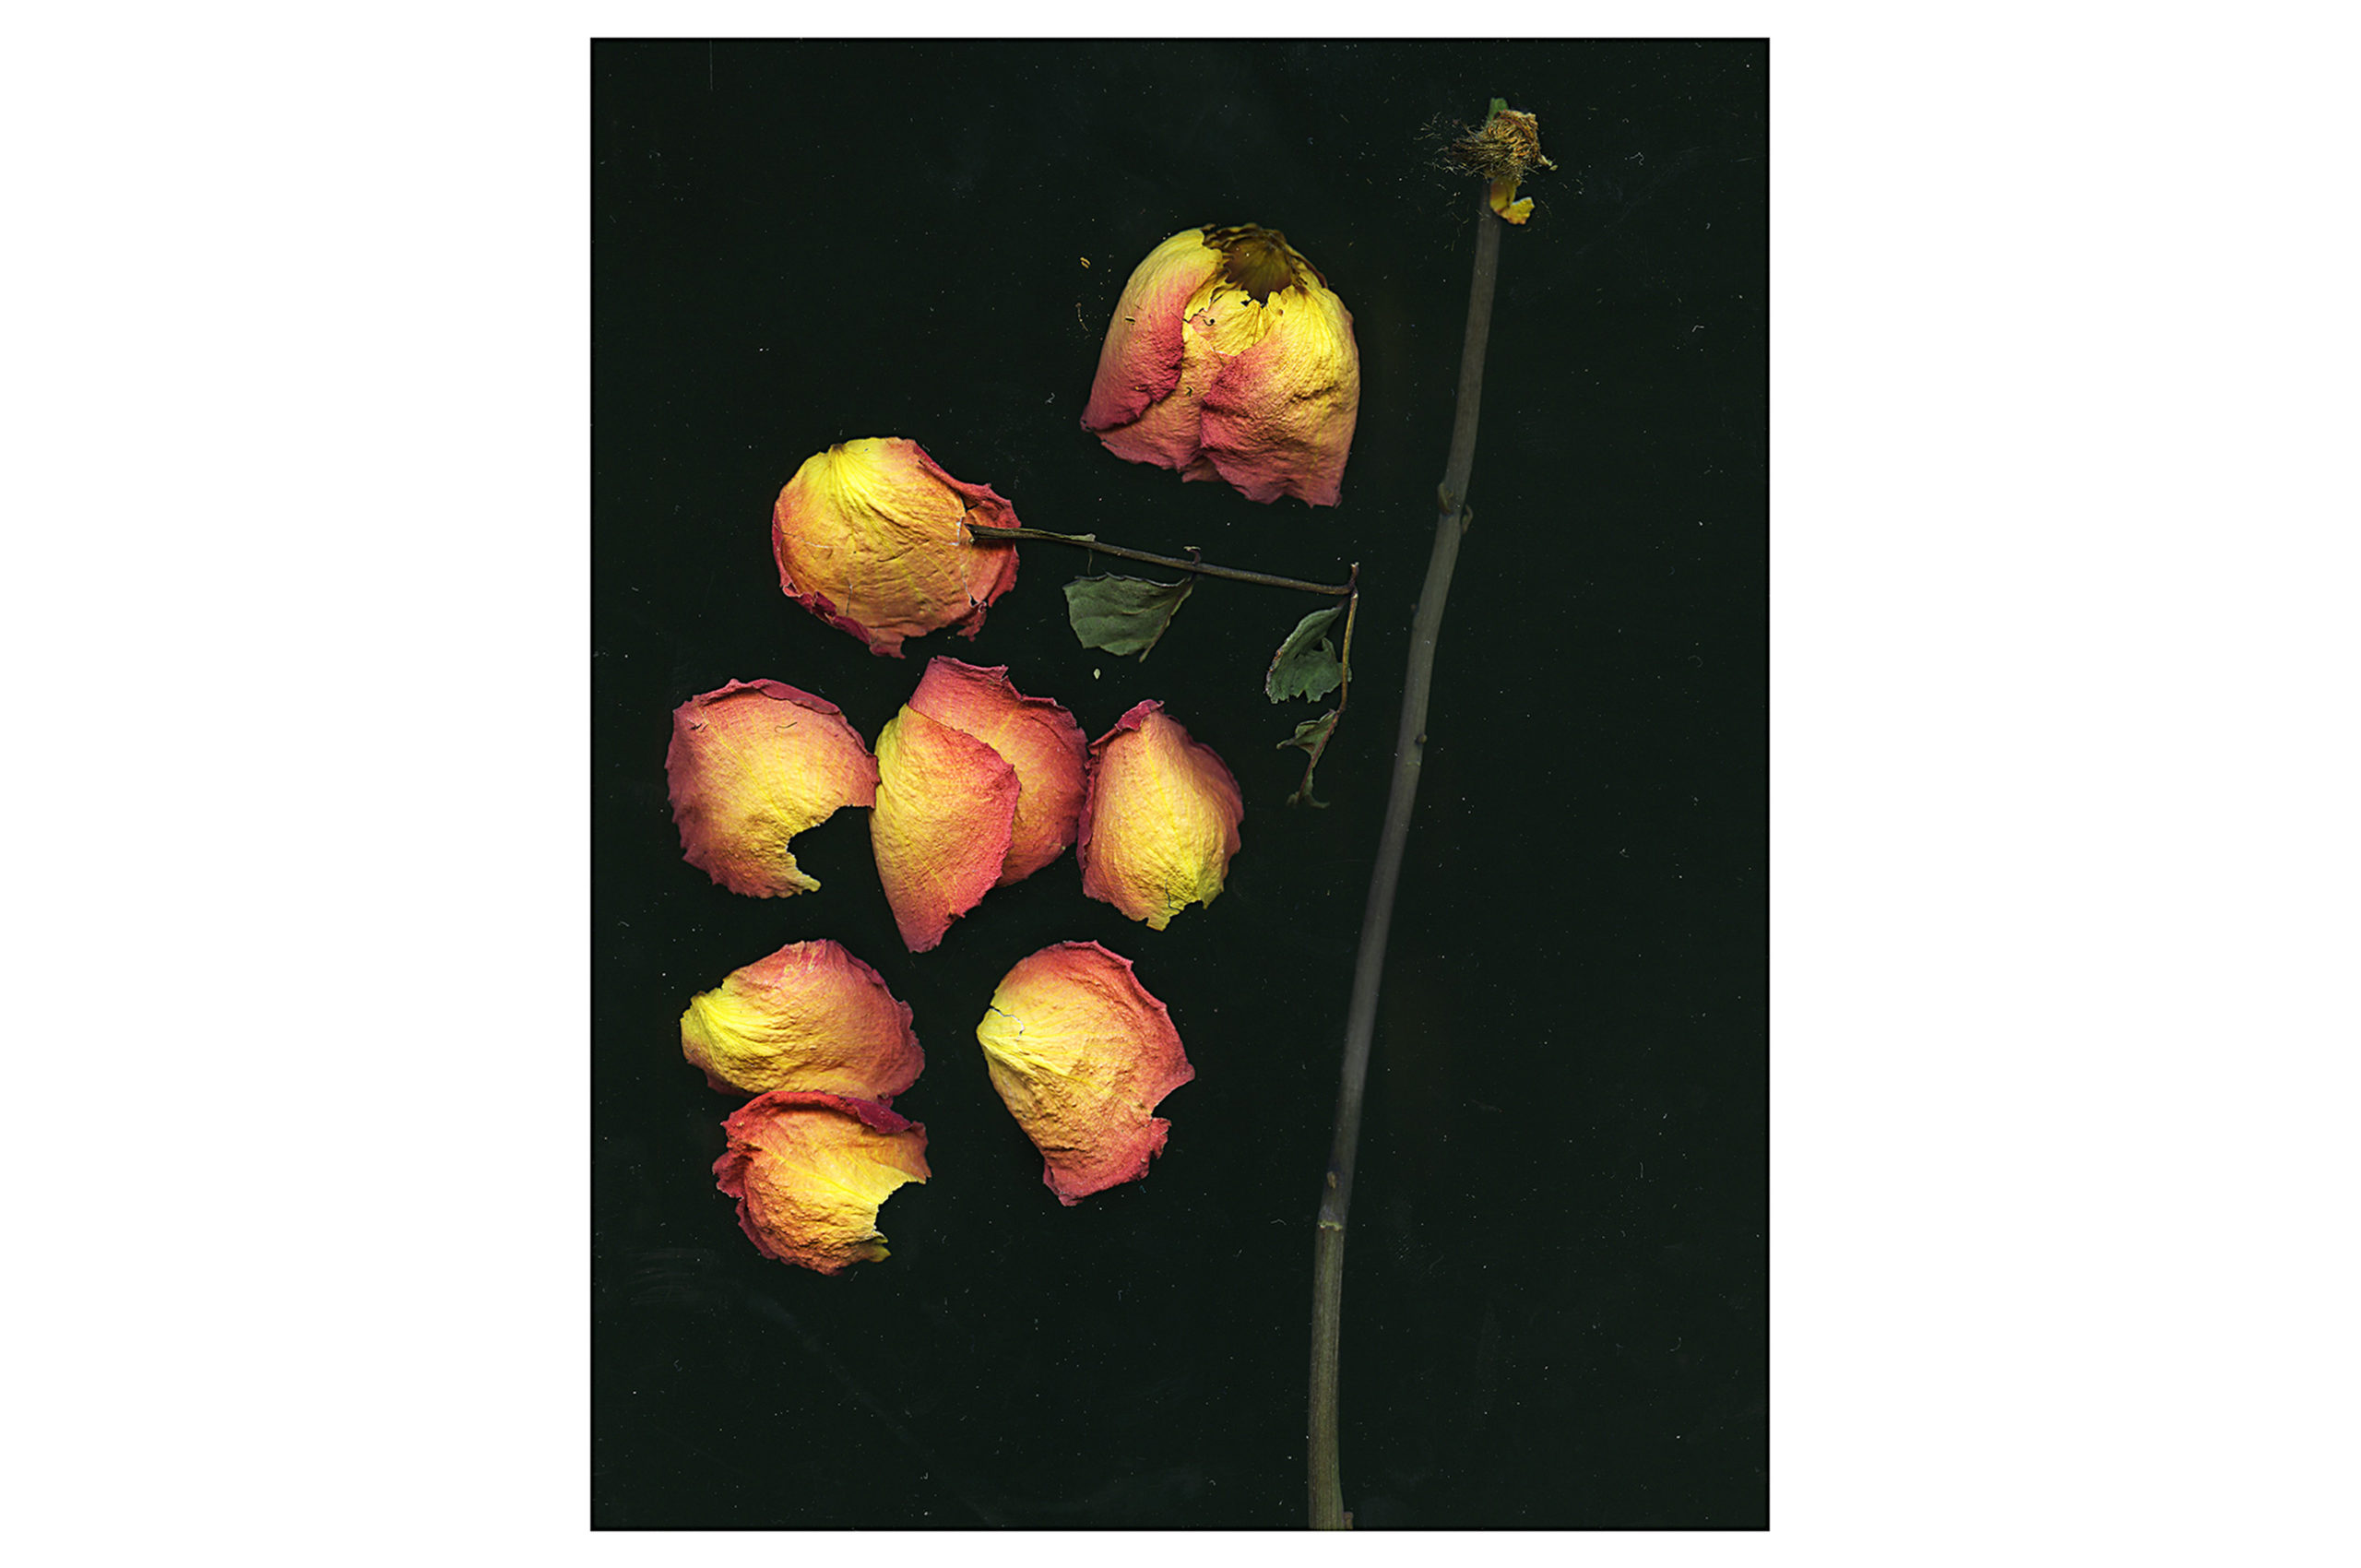 A deconstructed flower with petals removed from stem on a dark background